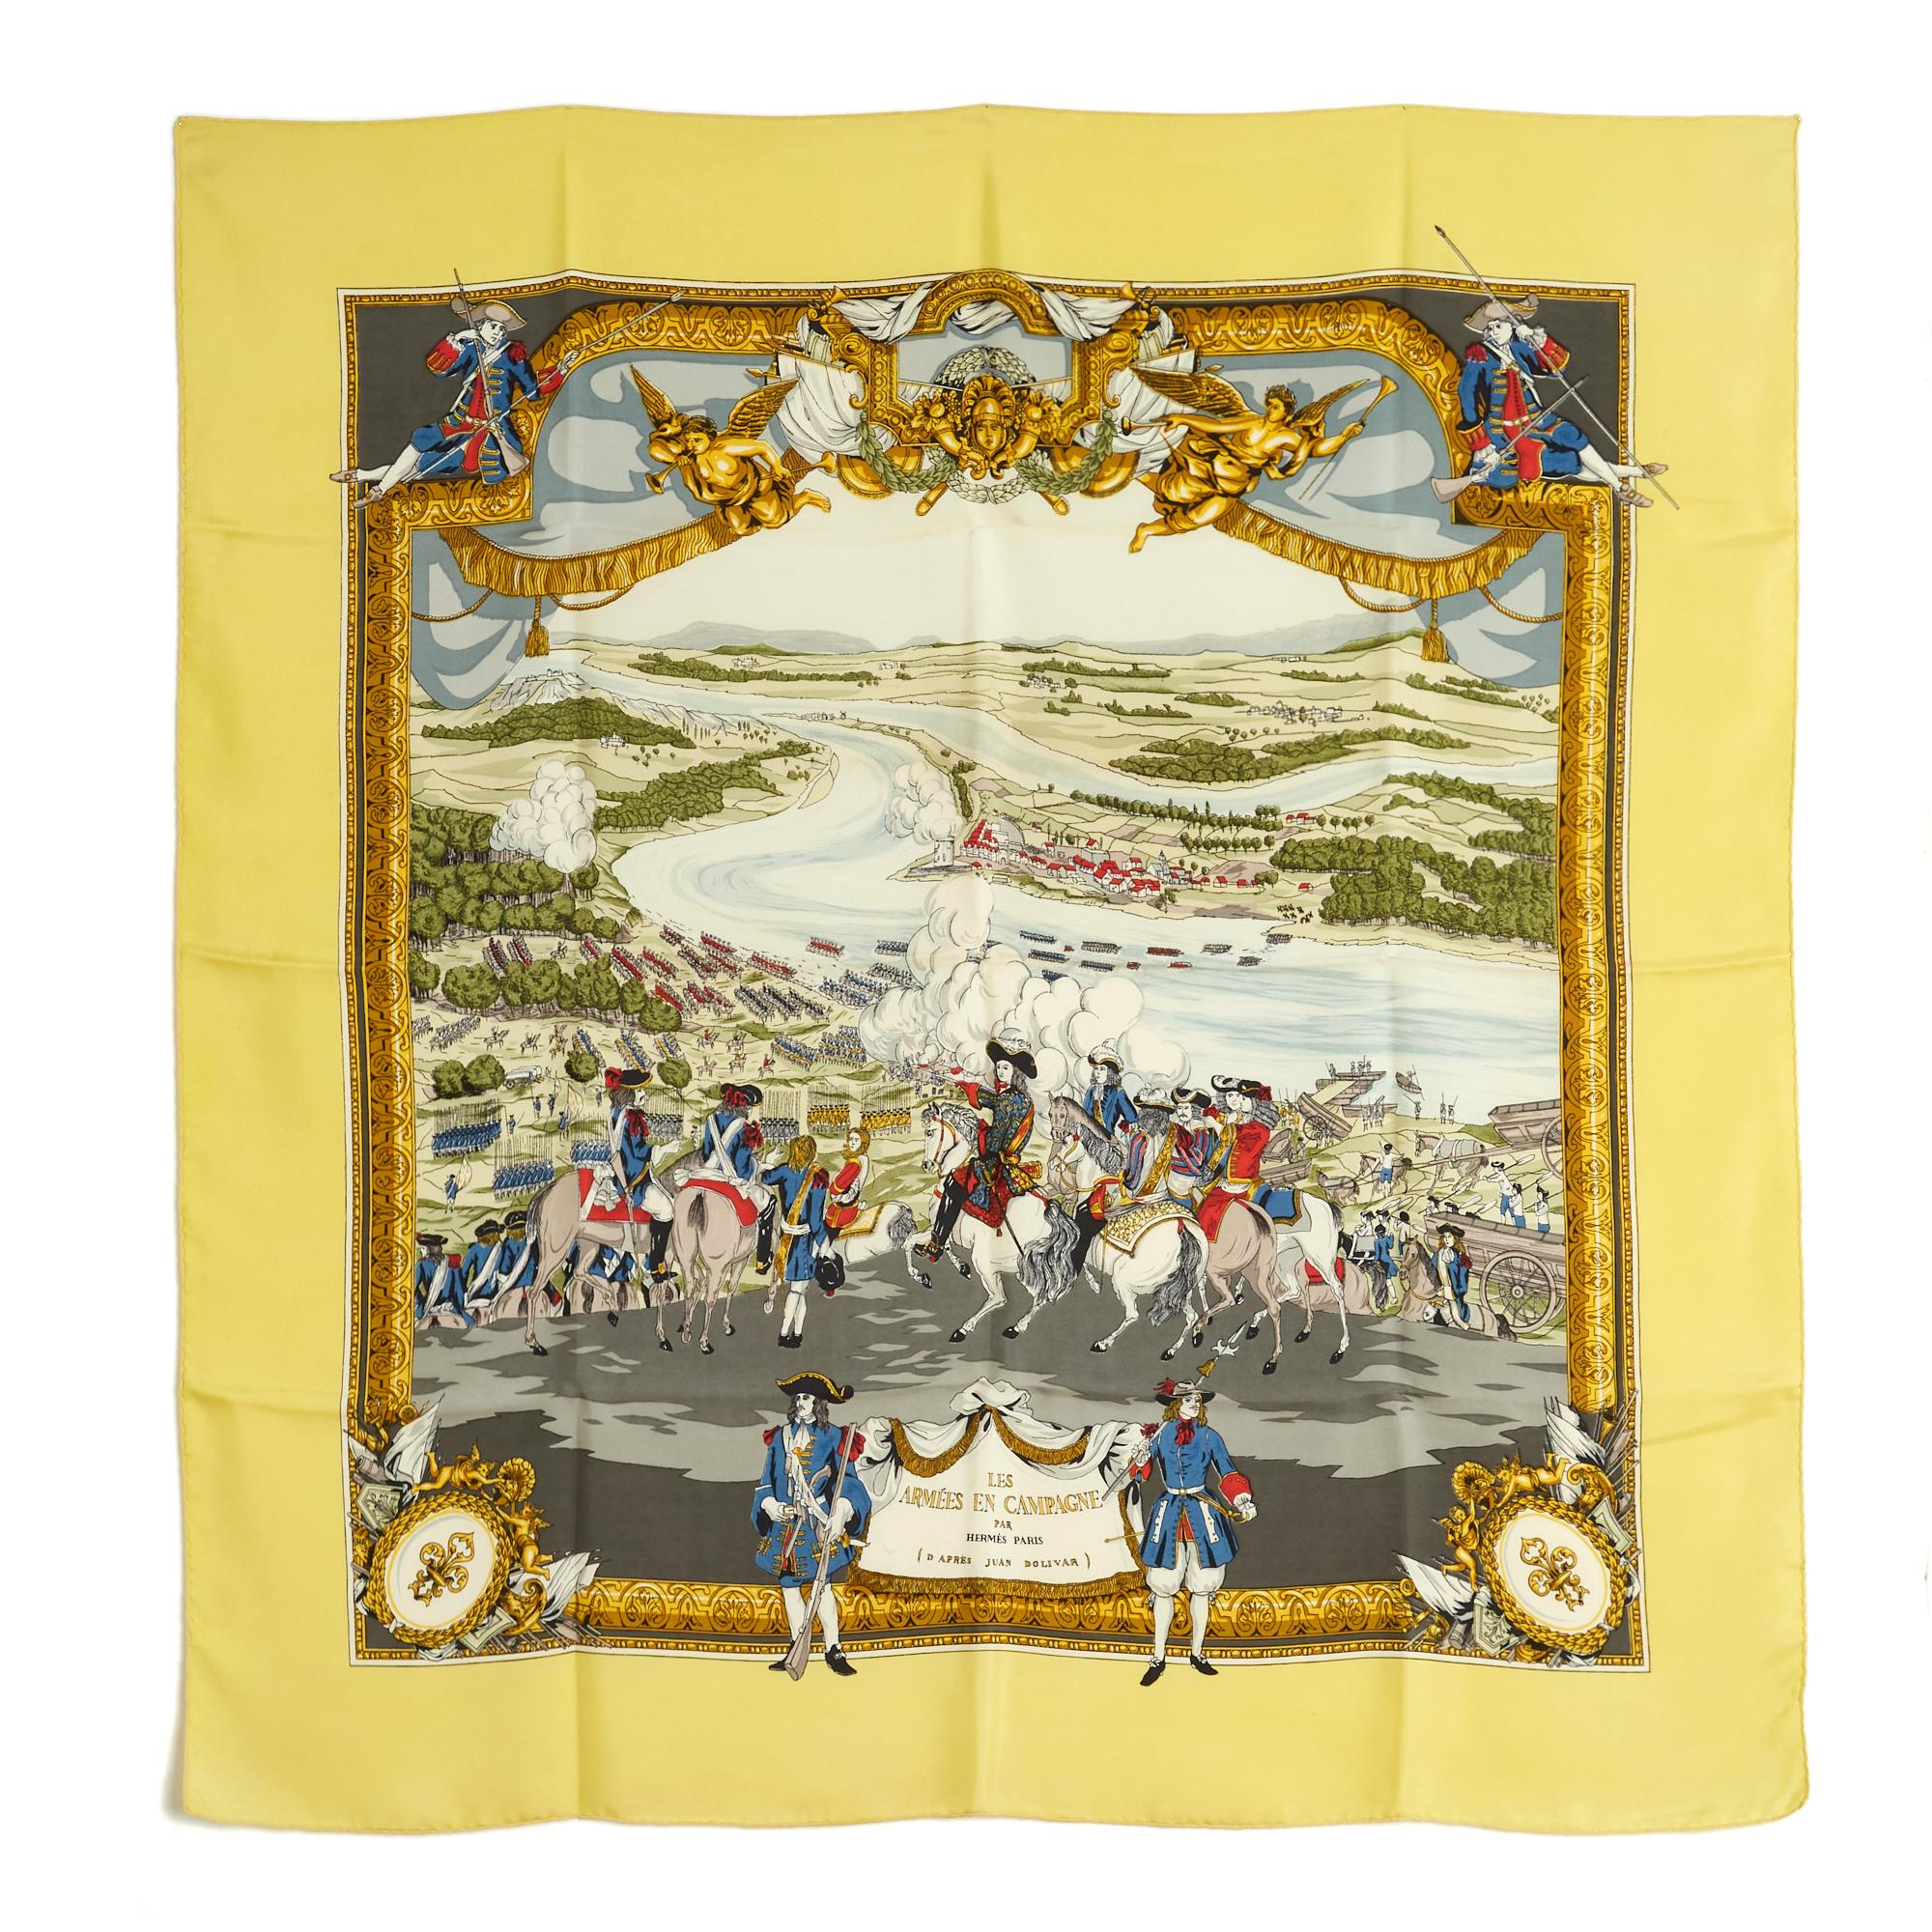 Hermès square 90 scarf in silk twill, Armies in the countryside pattern created by Lise Coutin after Juan Bolivar, published in 1961, with light yellow edge. Width 90 cm x length 90 cm approximately. The square is vintage and it probably shows some